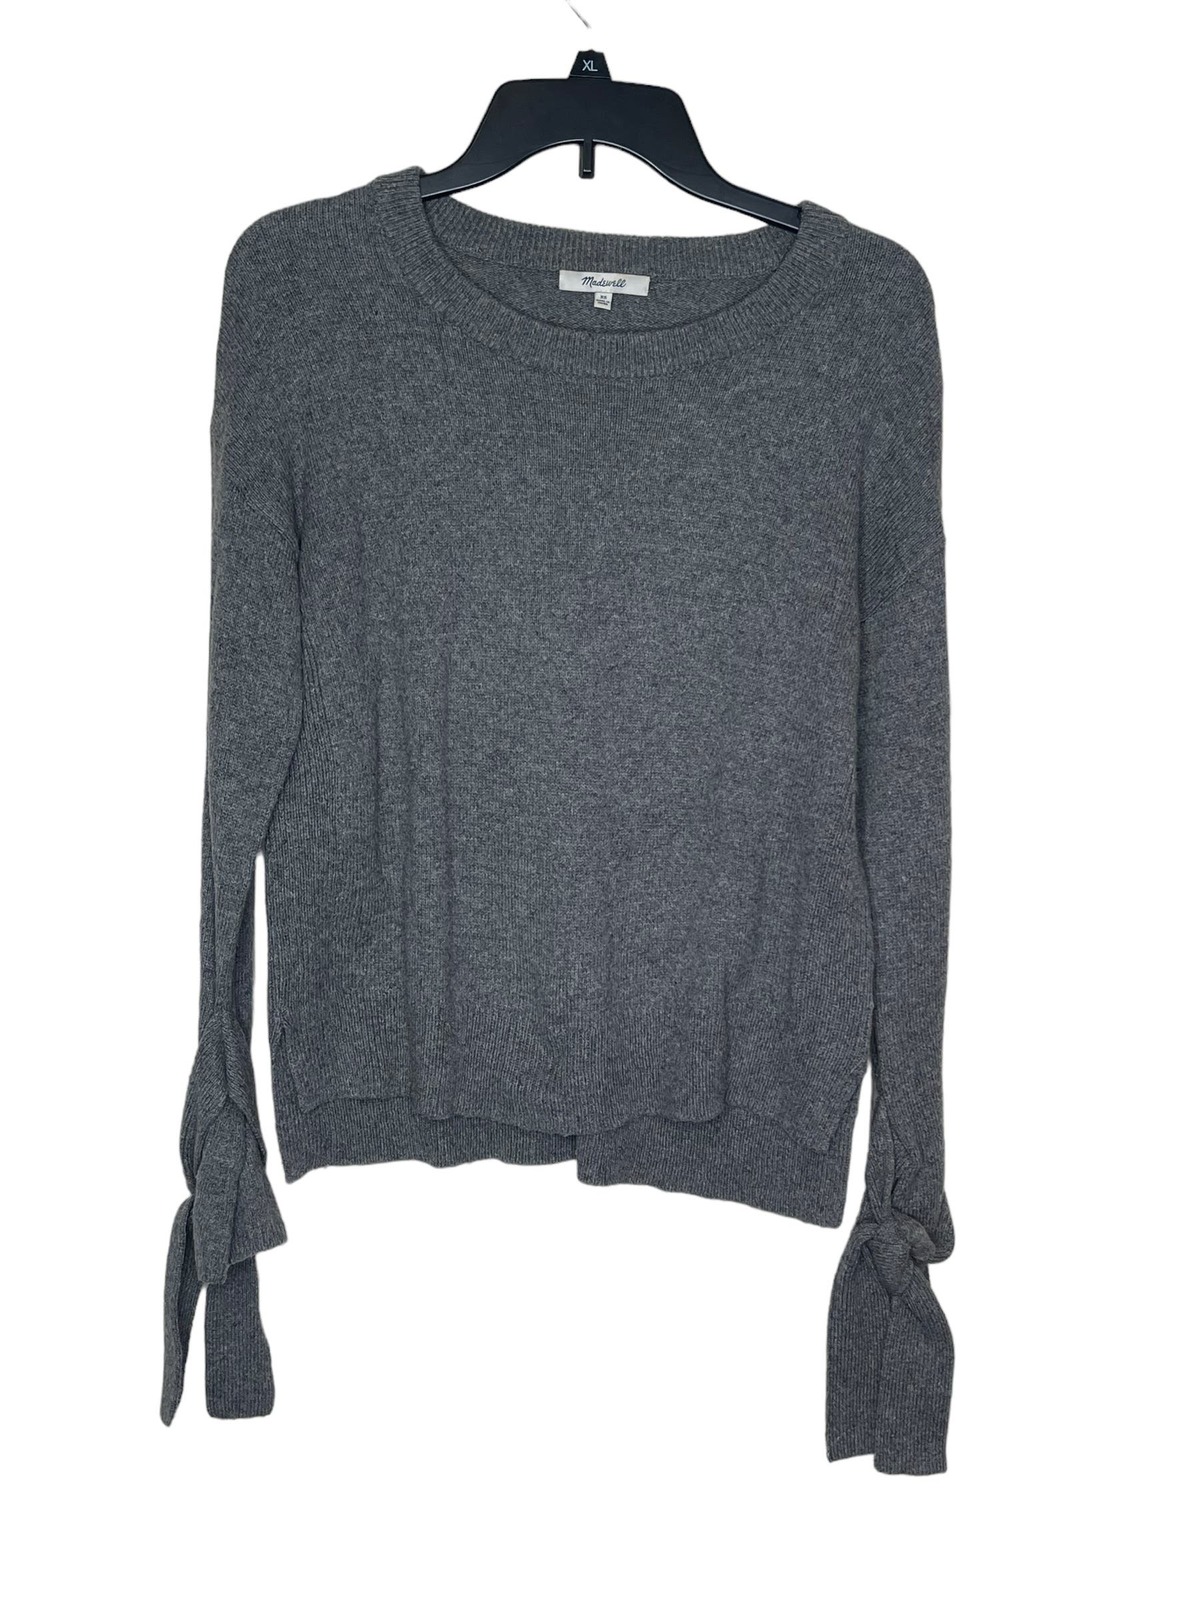 Primary image for Madewell Women's Sweater Tie Cuff Sleeve Pullover Knit Crewneck Gray Size XS